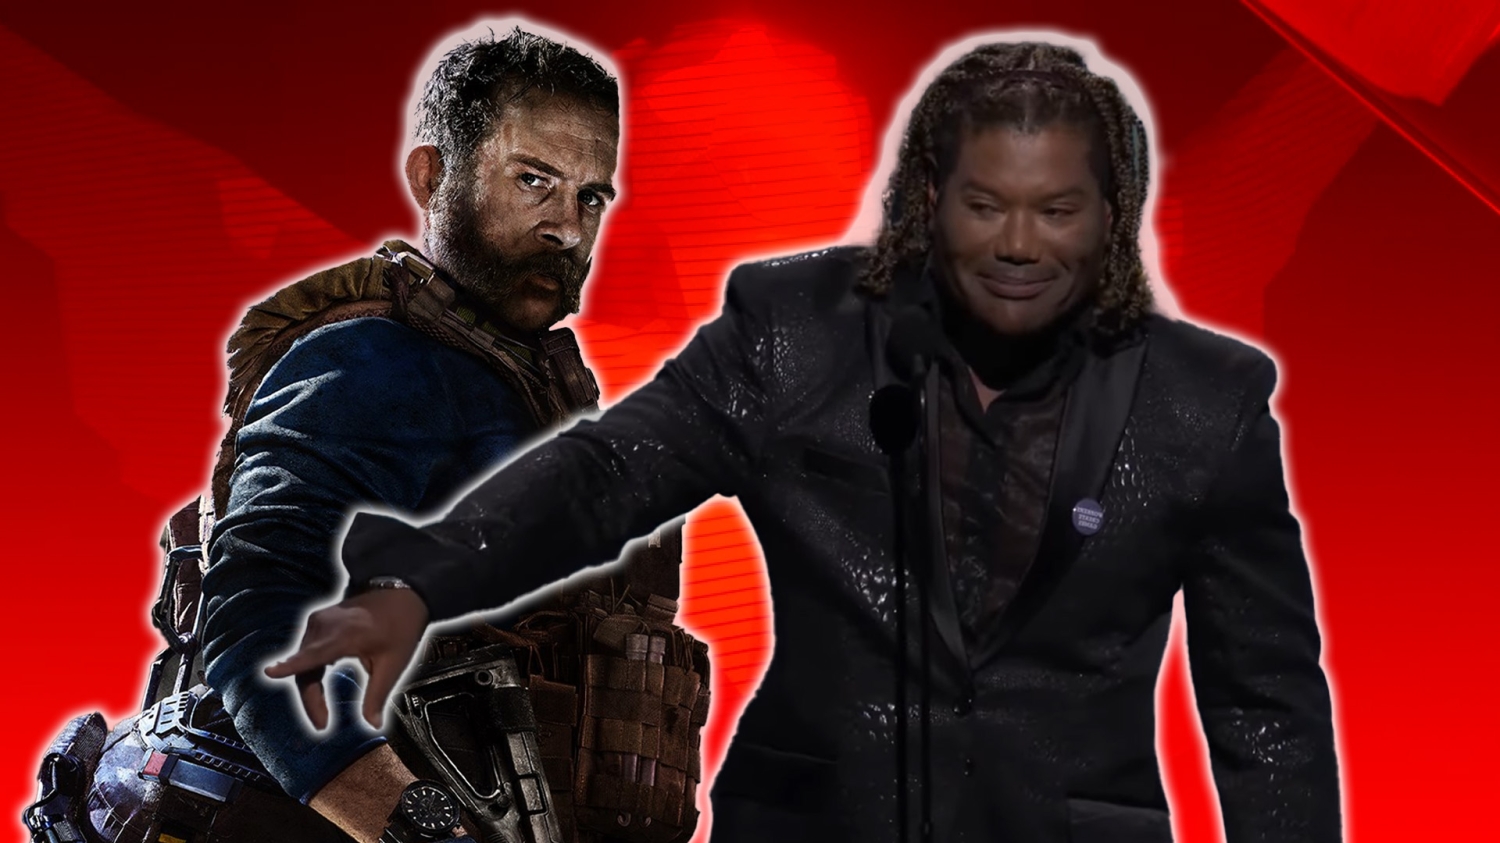 Kratos VA Christopher Judge faces mixed reactions as he's chosen to present  a citation at The Game Awards 2023 - The SportsRush